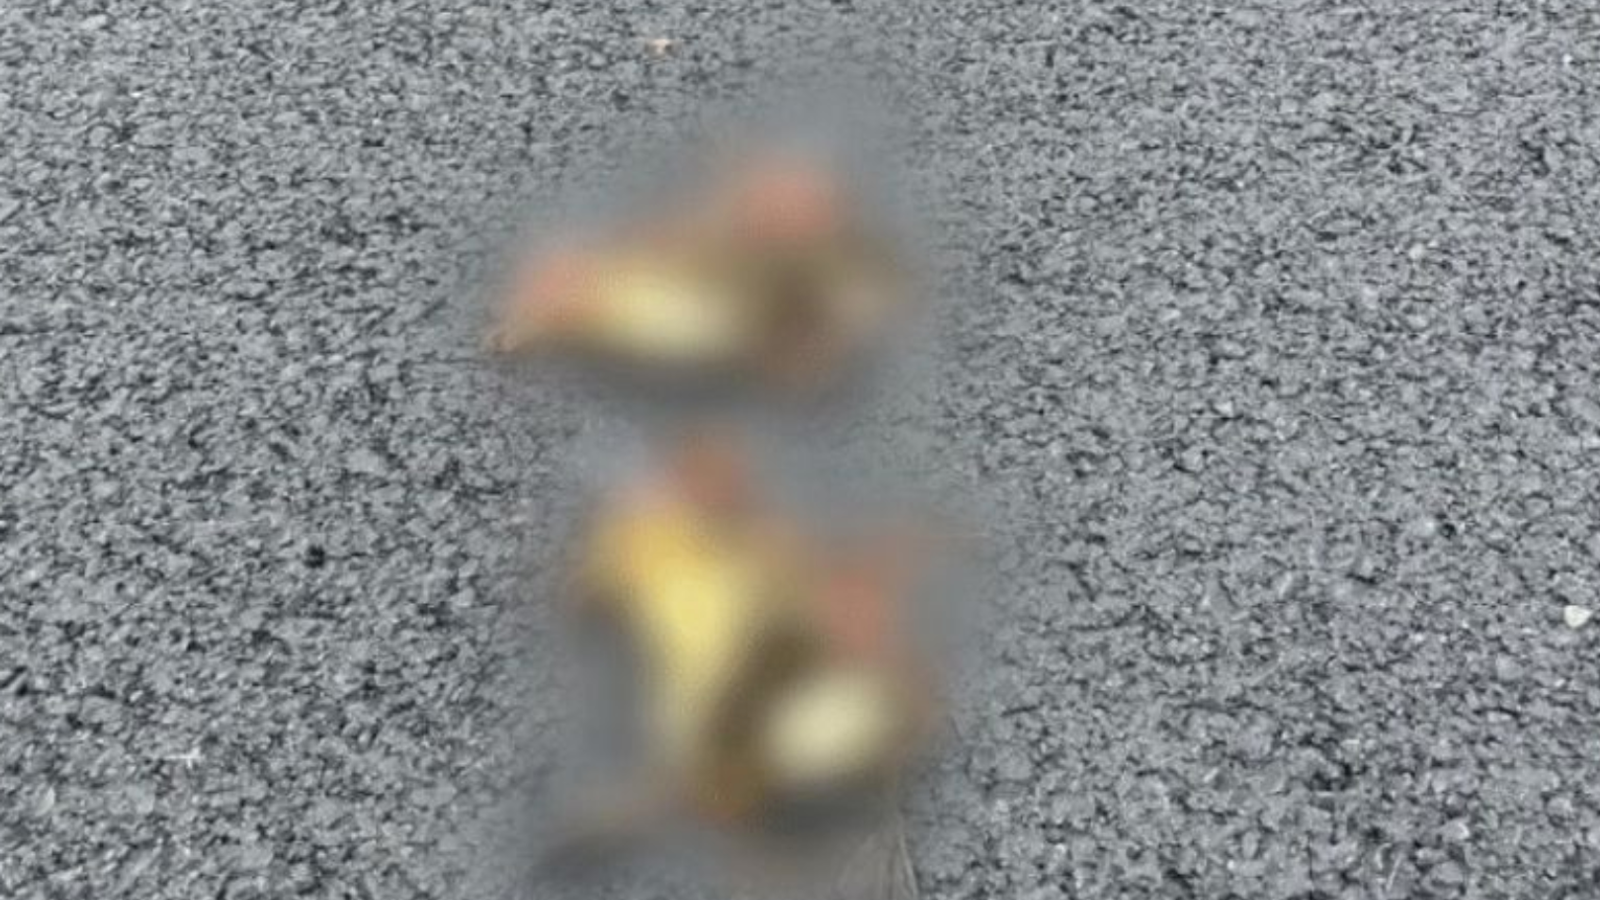 Staffordshire Police investigate claims van driver ‘drove straight over’ family of ducklings crossing road | UK News